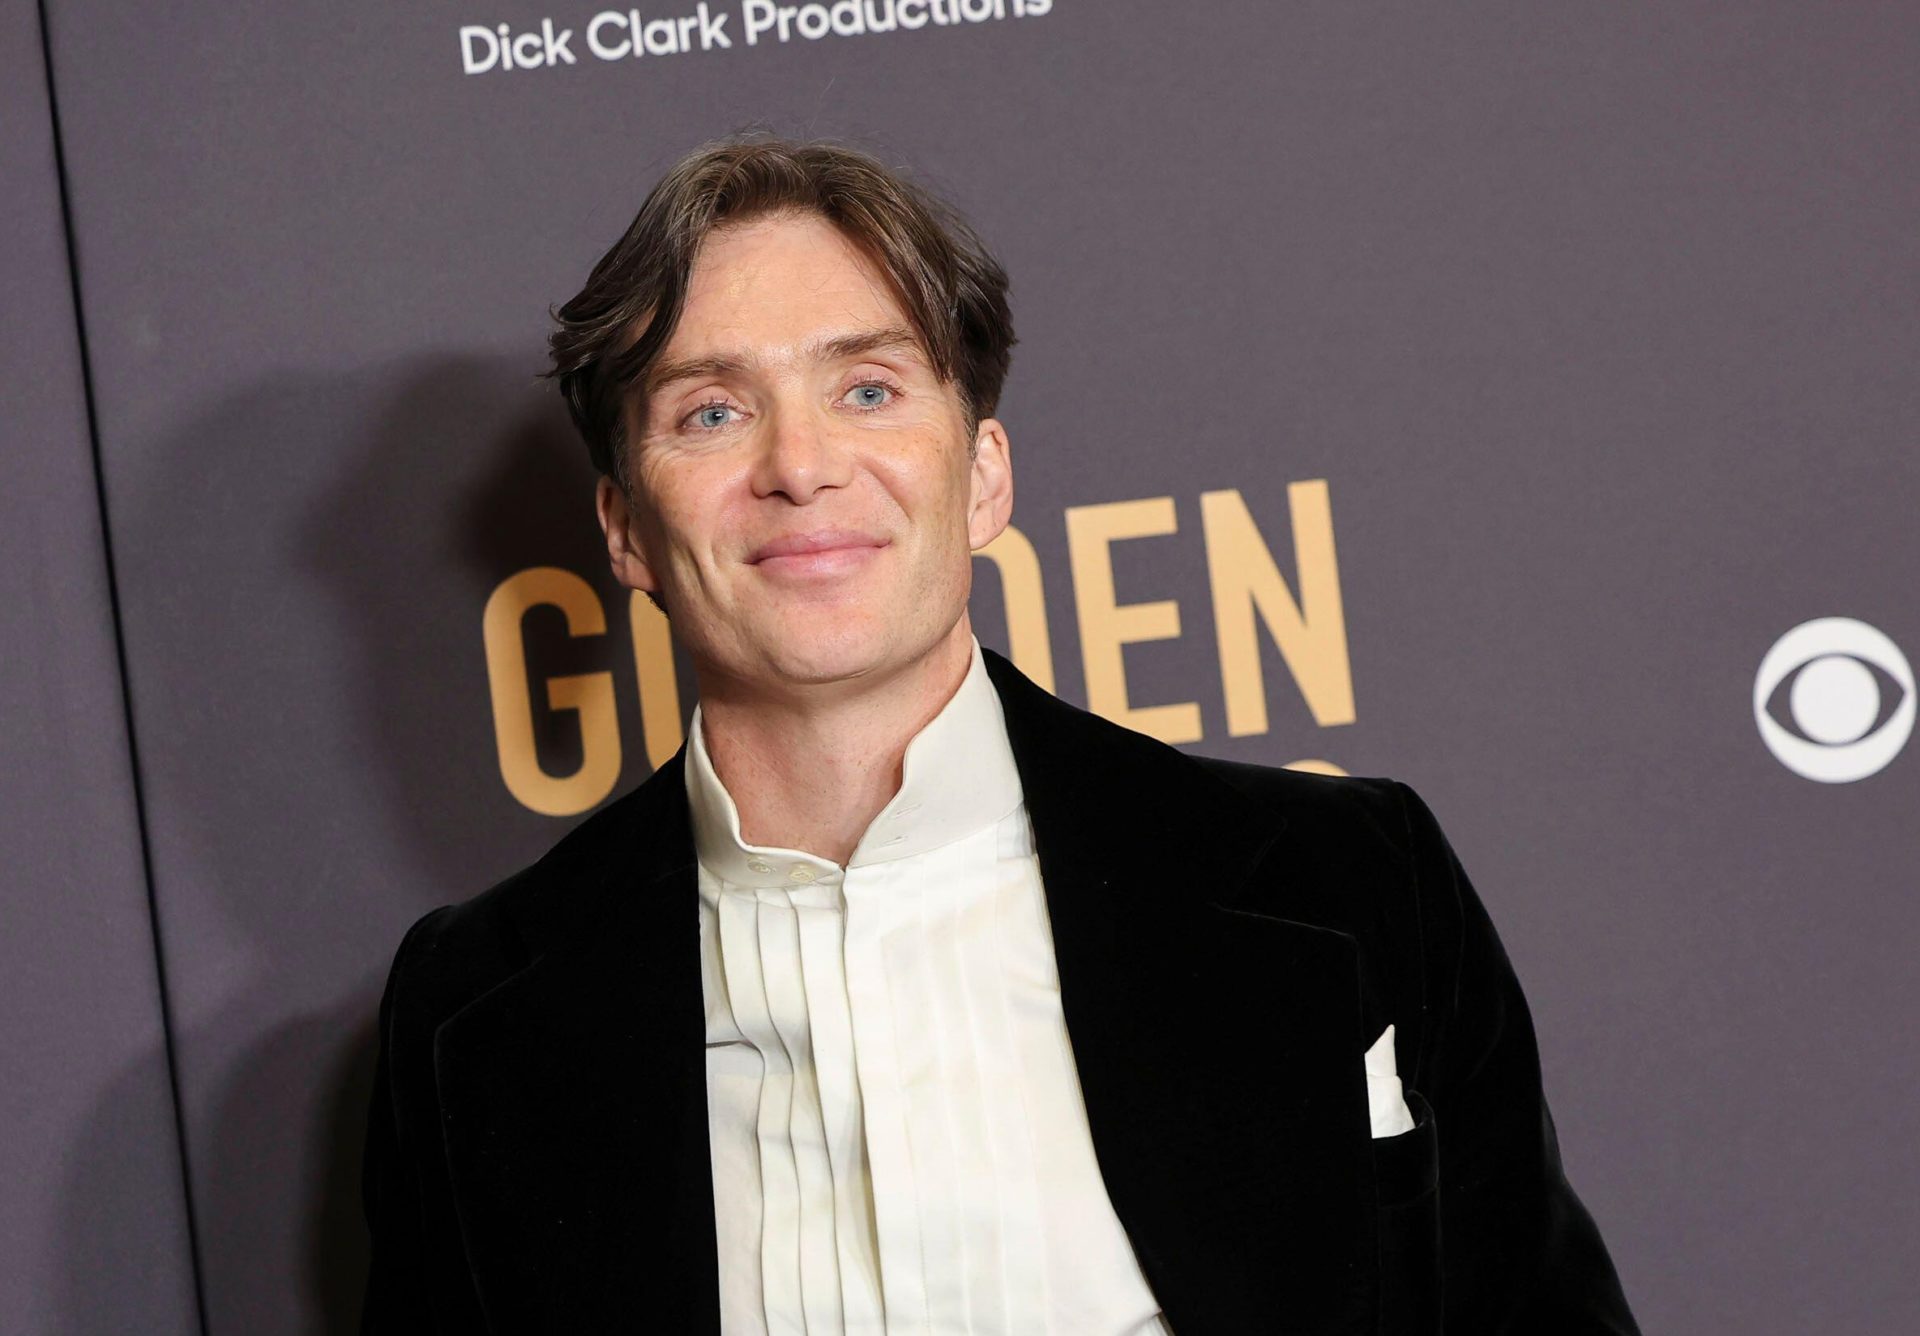 Cillian Murphy Takes Home Best Actor At The Golden Globes